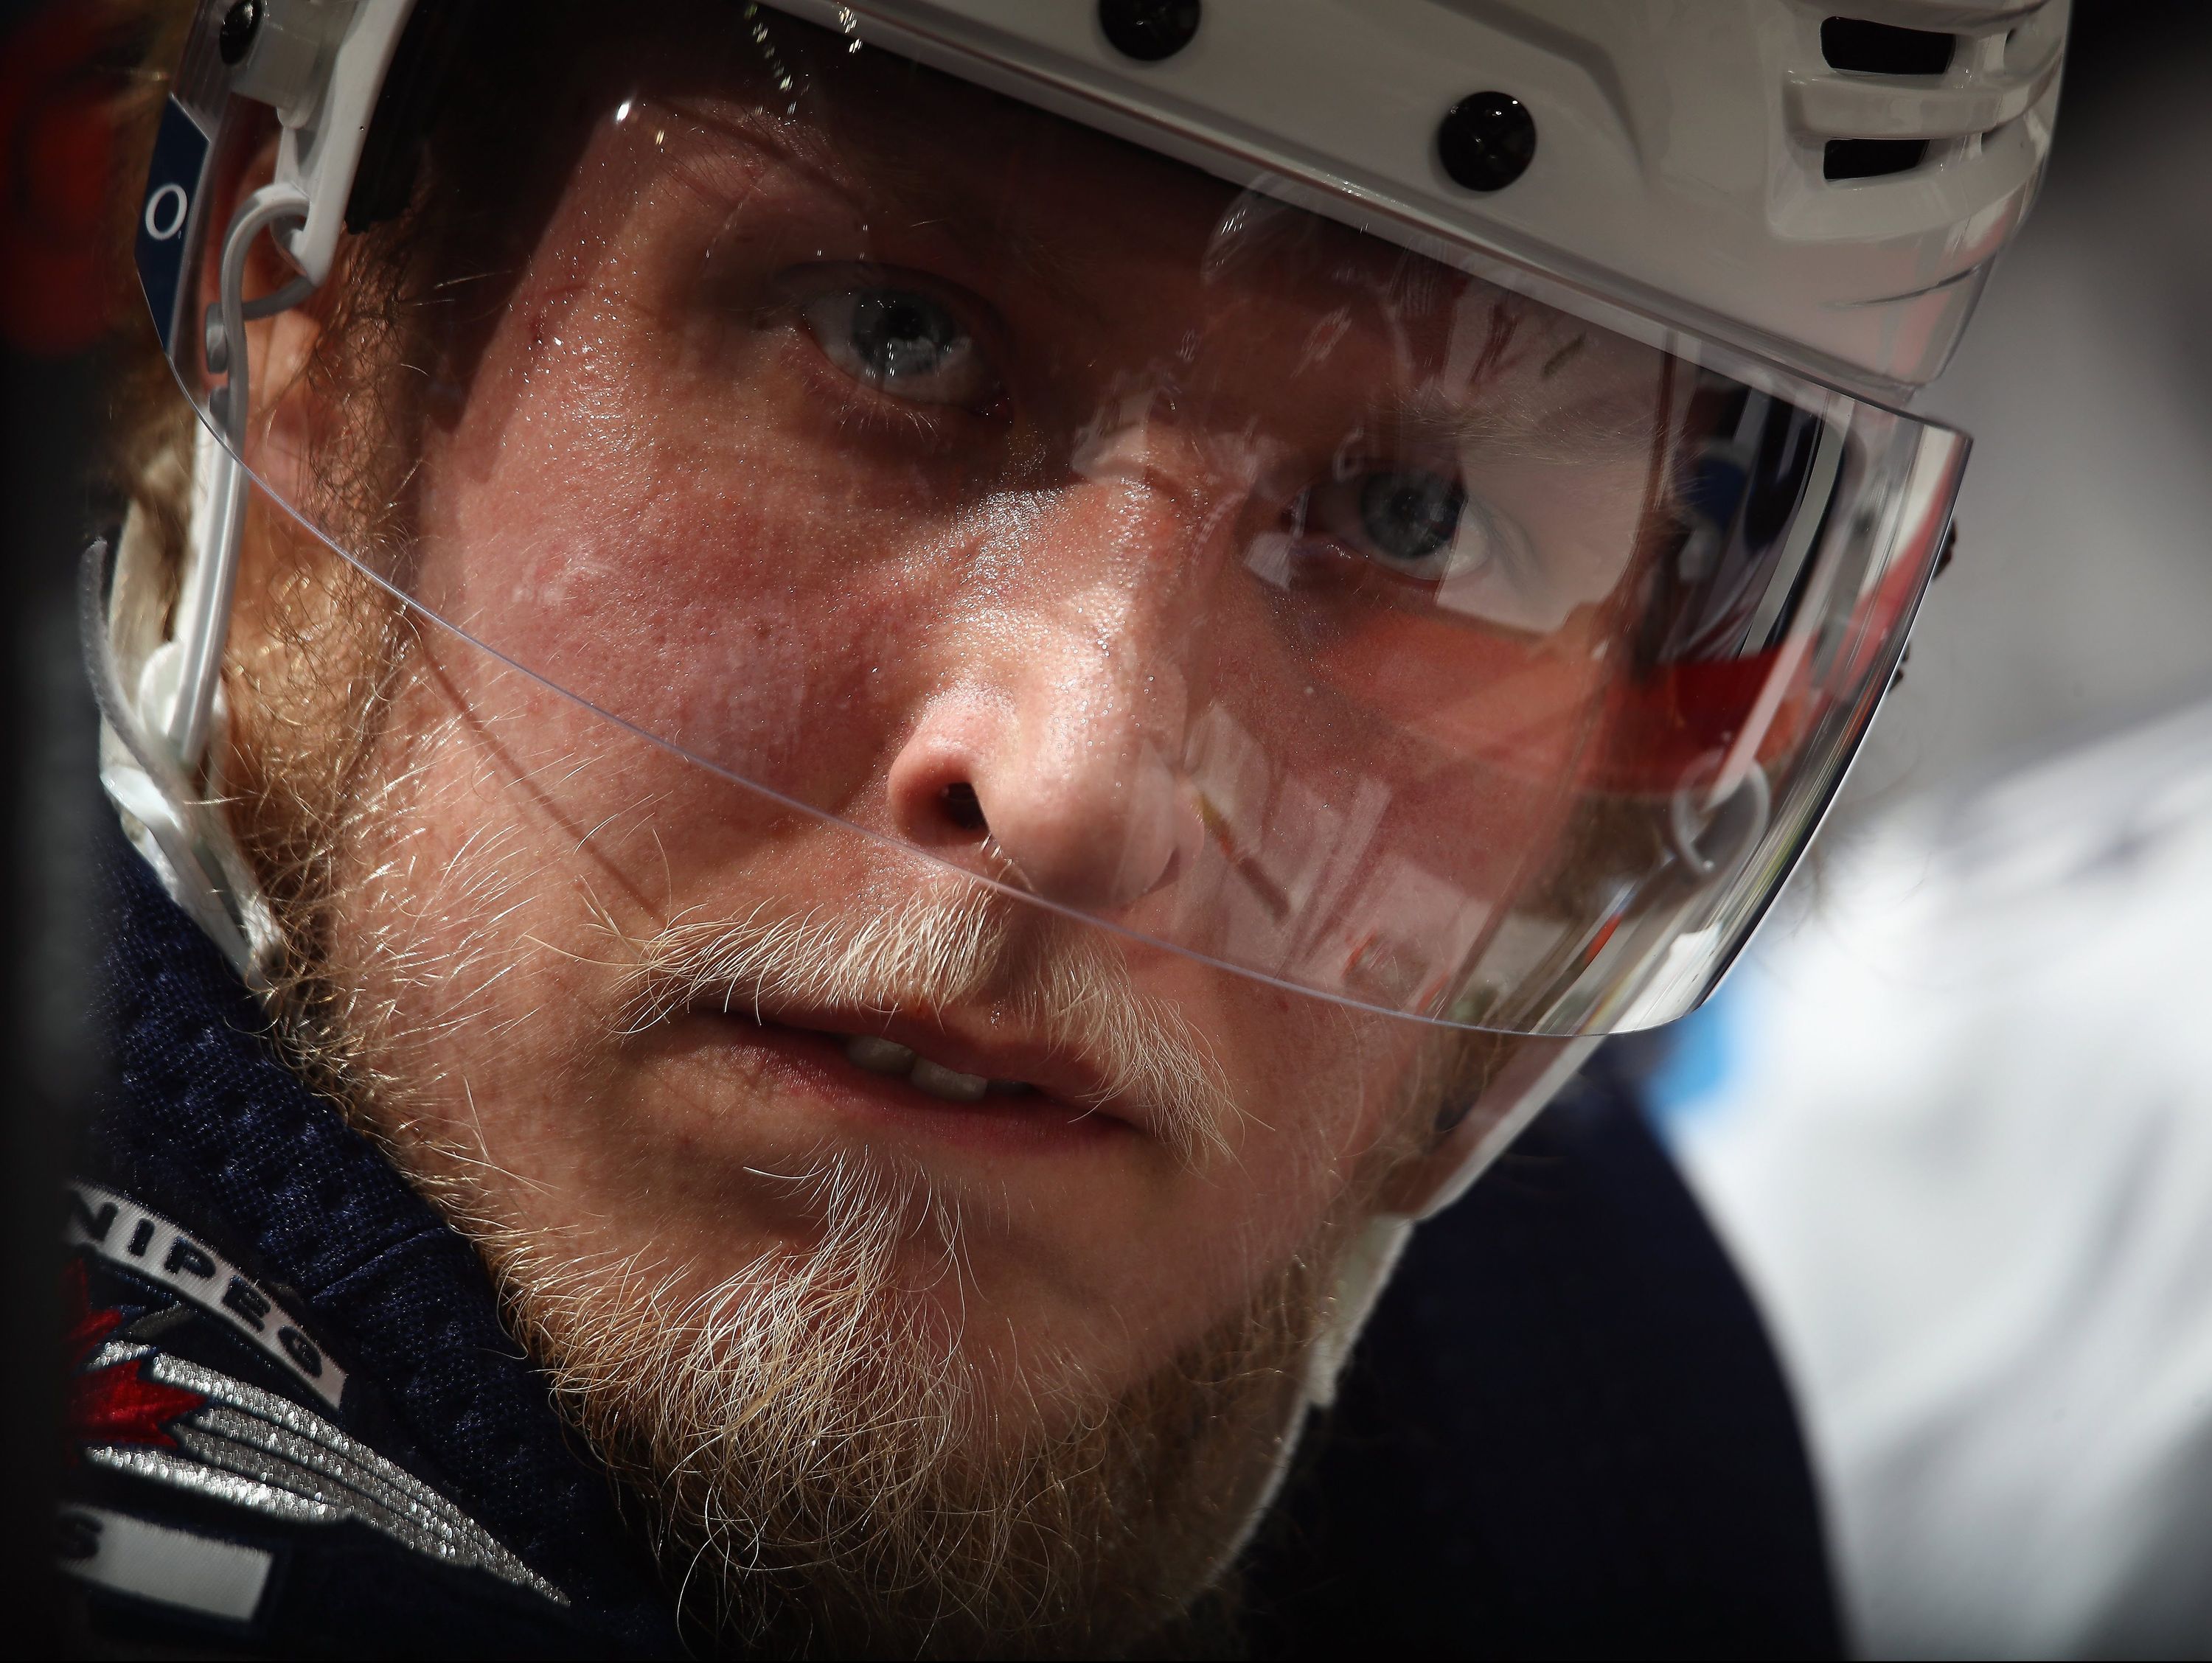 Patrik Laine and Elias Pettersson Announced as NHL 20 Cover Athletes For  Finland and Sweden - Operation Sports